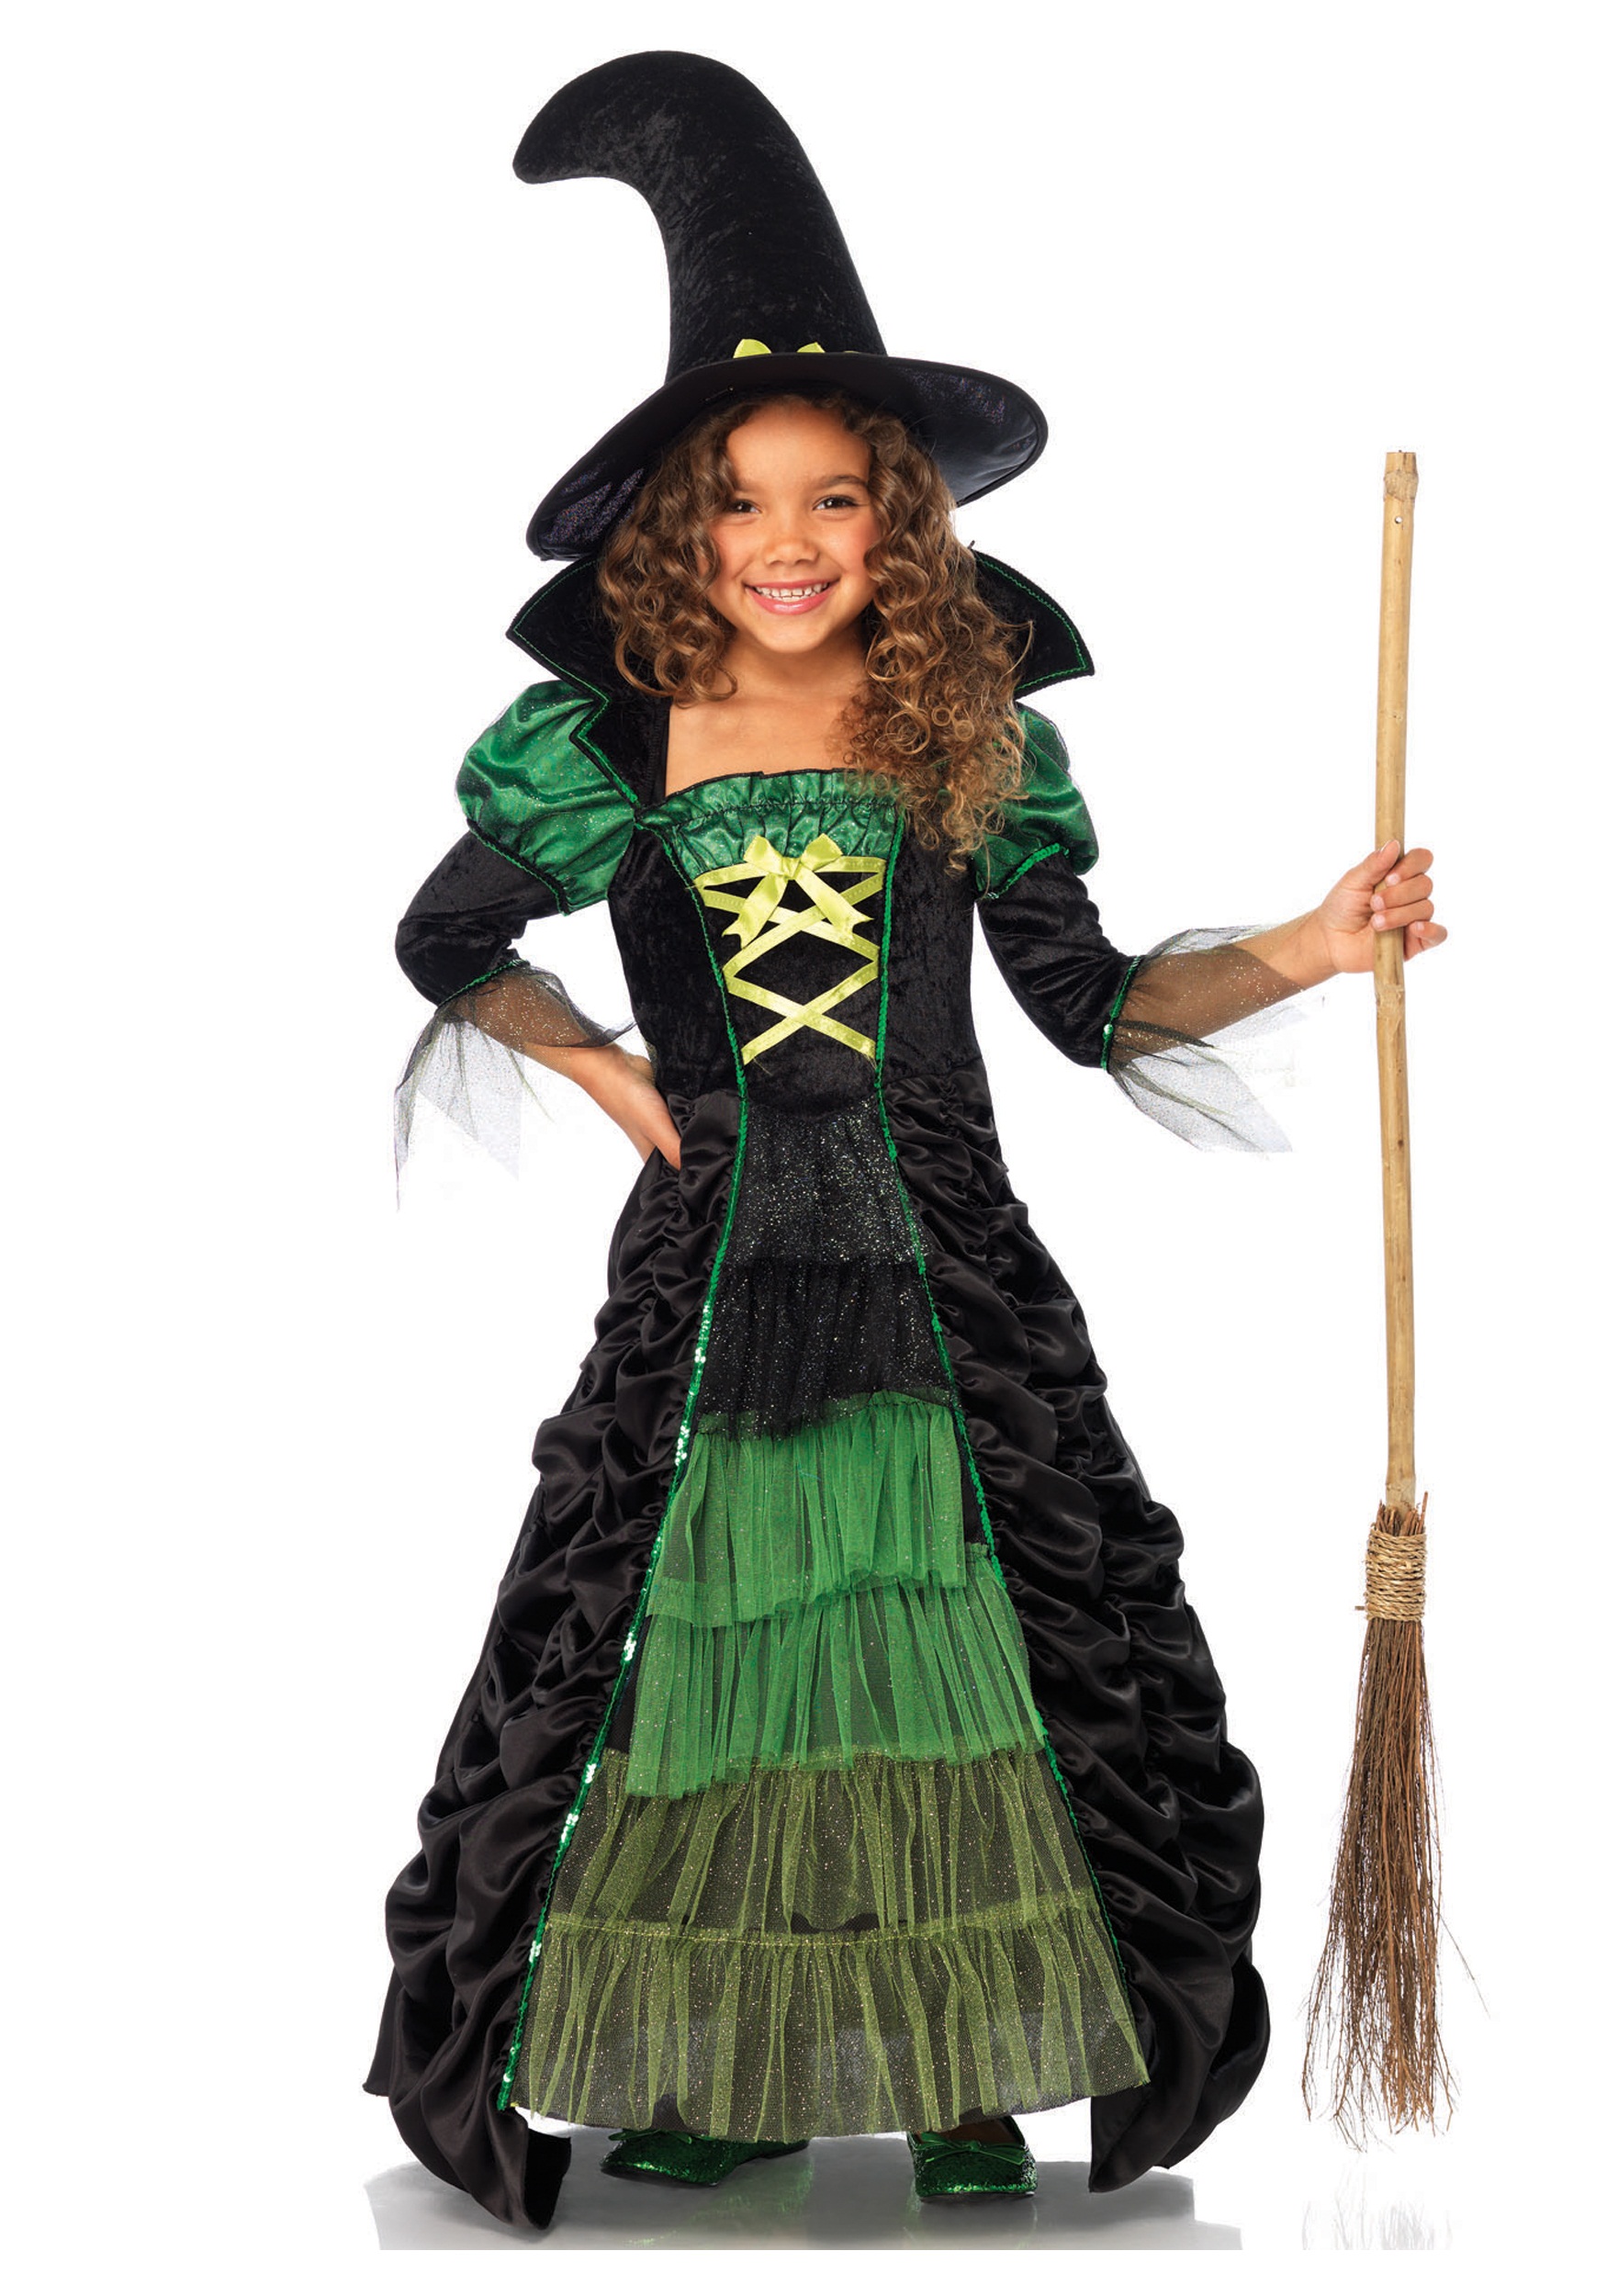 Child Storybook Witch Costume